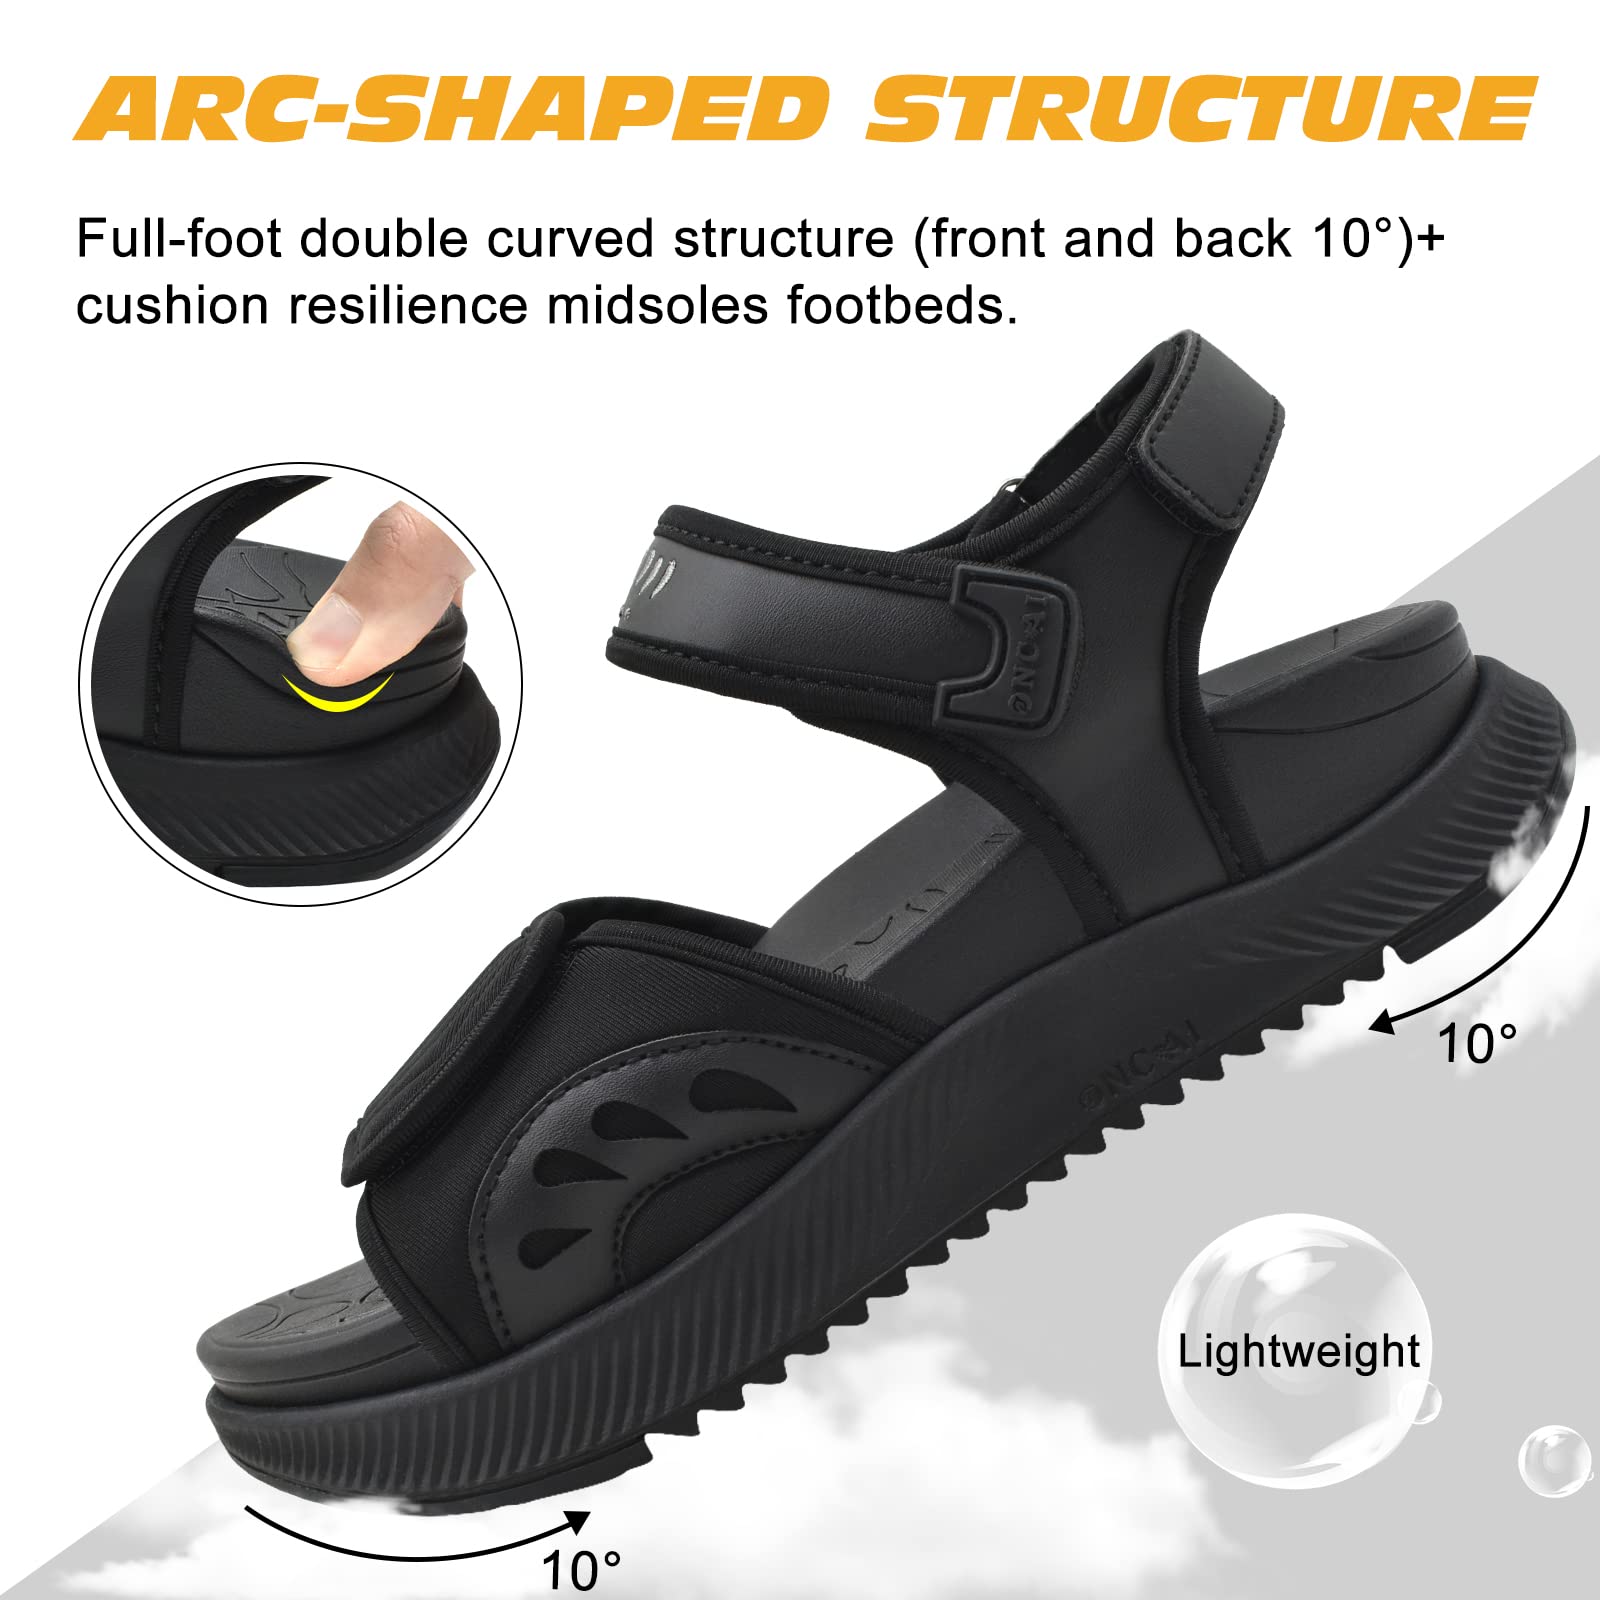 ONCAI Walking Sandals Women,Arch Support Hiking Sandals with Orthotic Outdoor Footbed for Plantar Fasciitis,Water Athletic Platform Sandalias Mujer with 3 Adjustable Strap Black Size 8